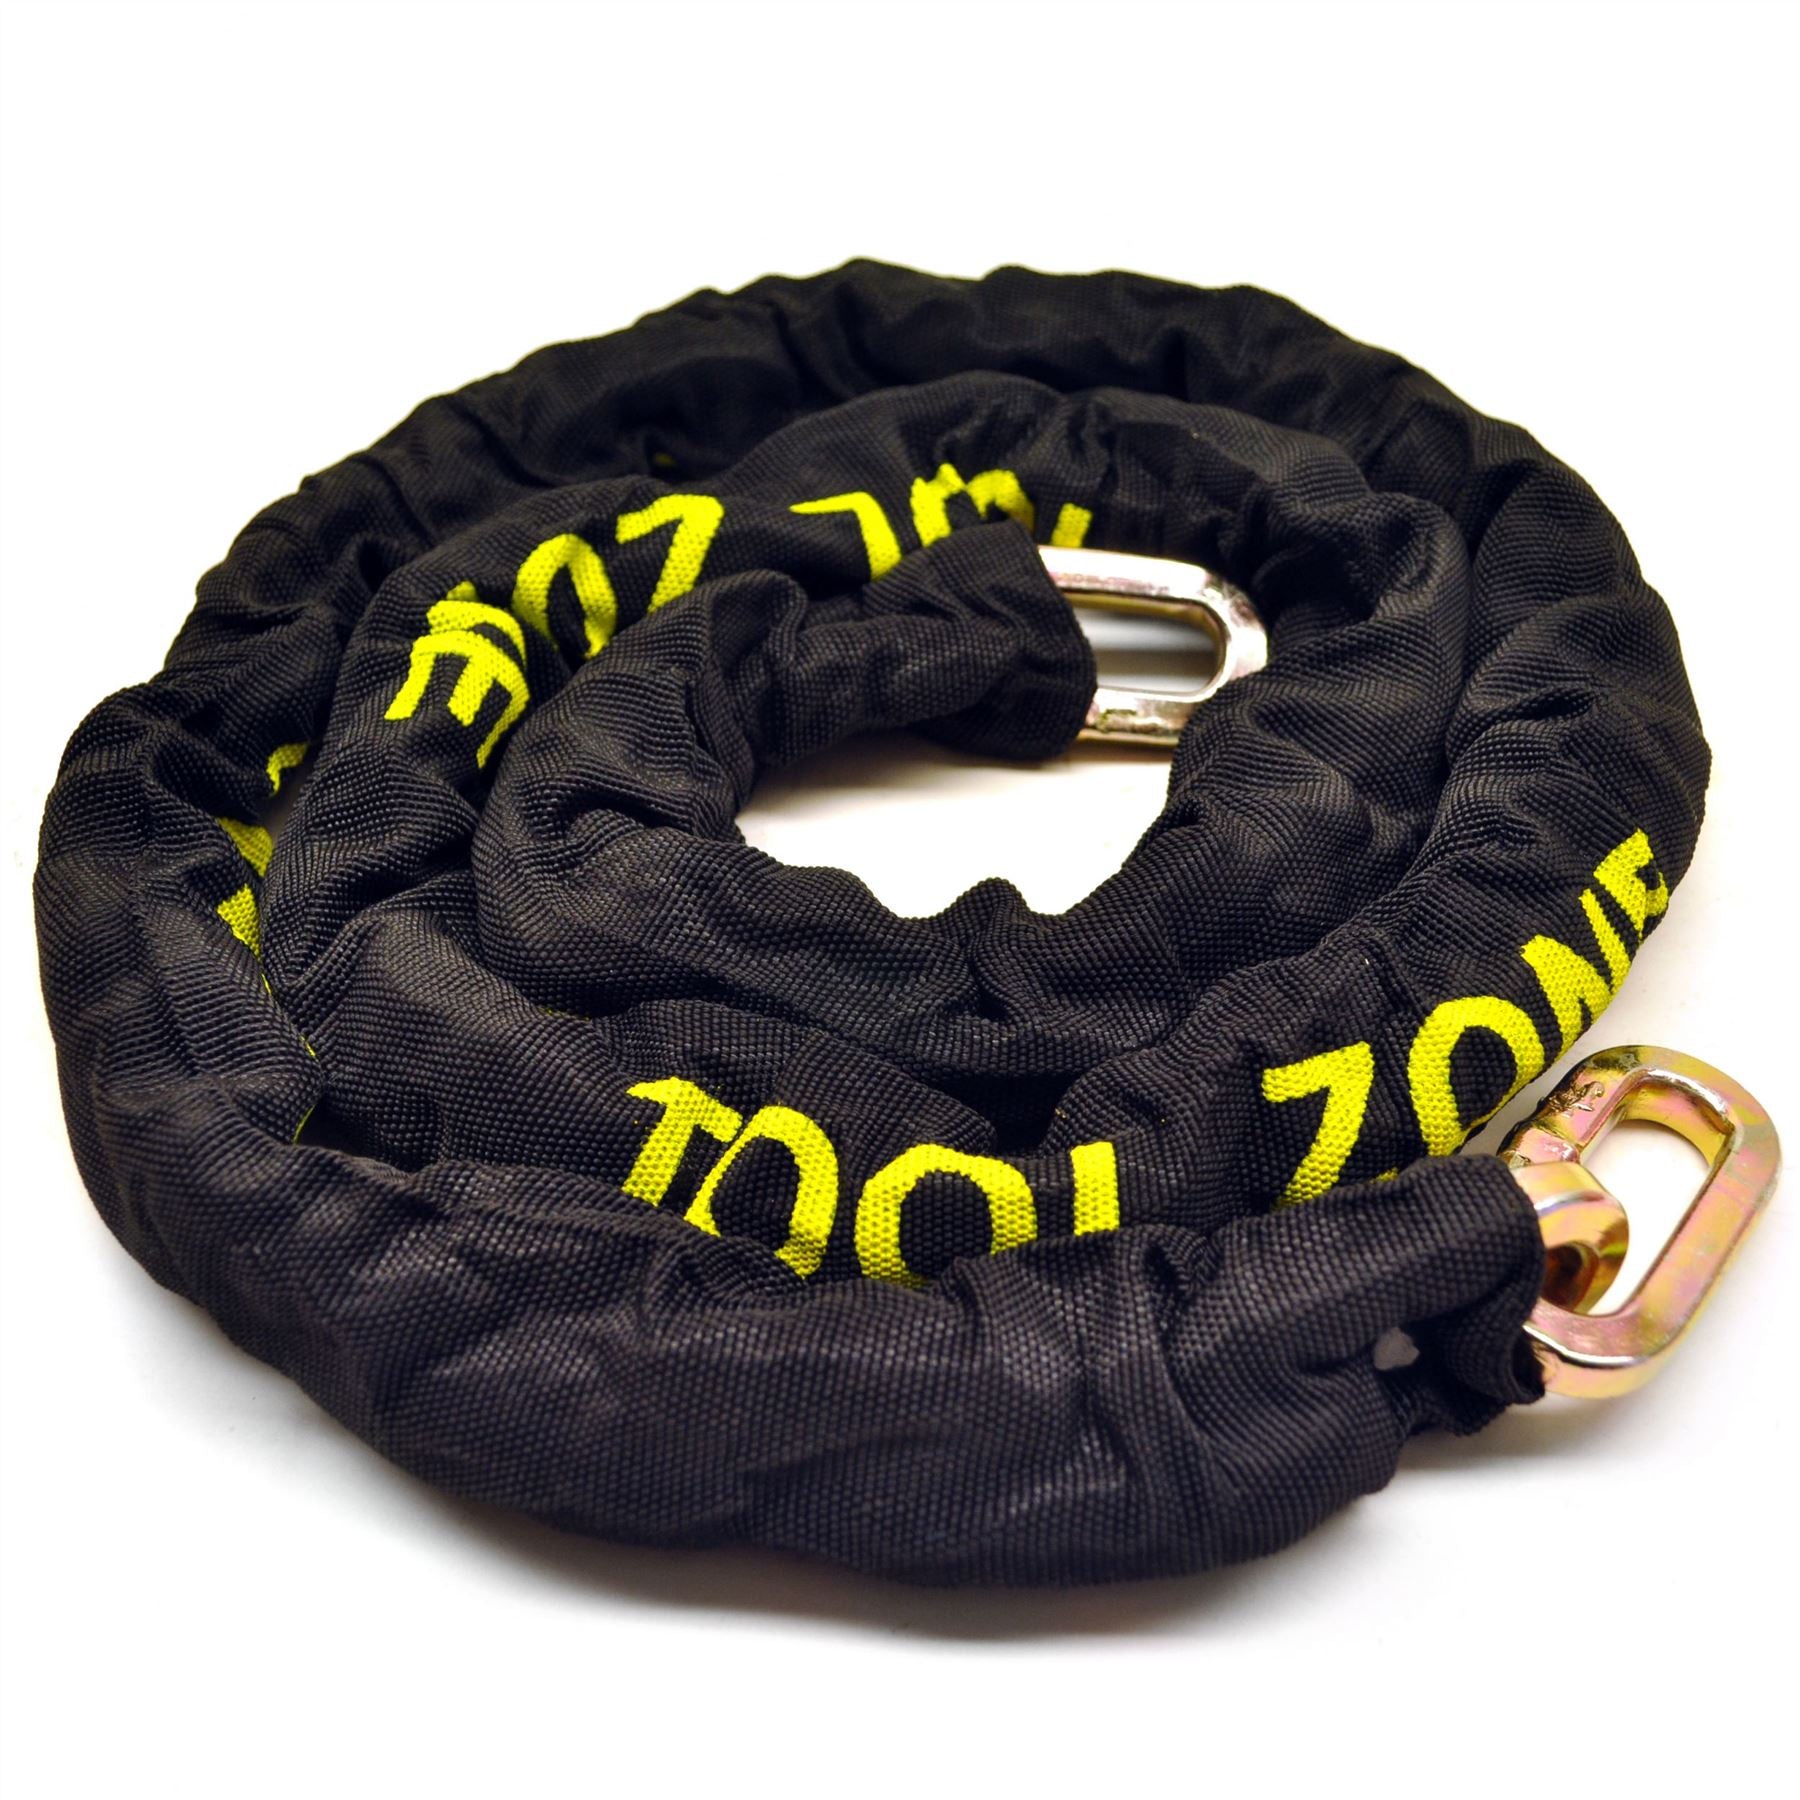 Heavy Duty Security Chain 1.8m / Chain Lock With Nylon Cover TE377